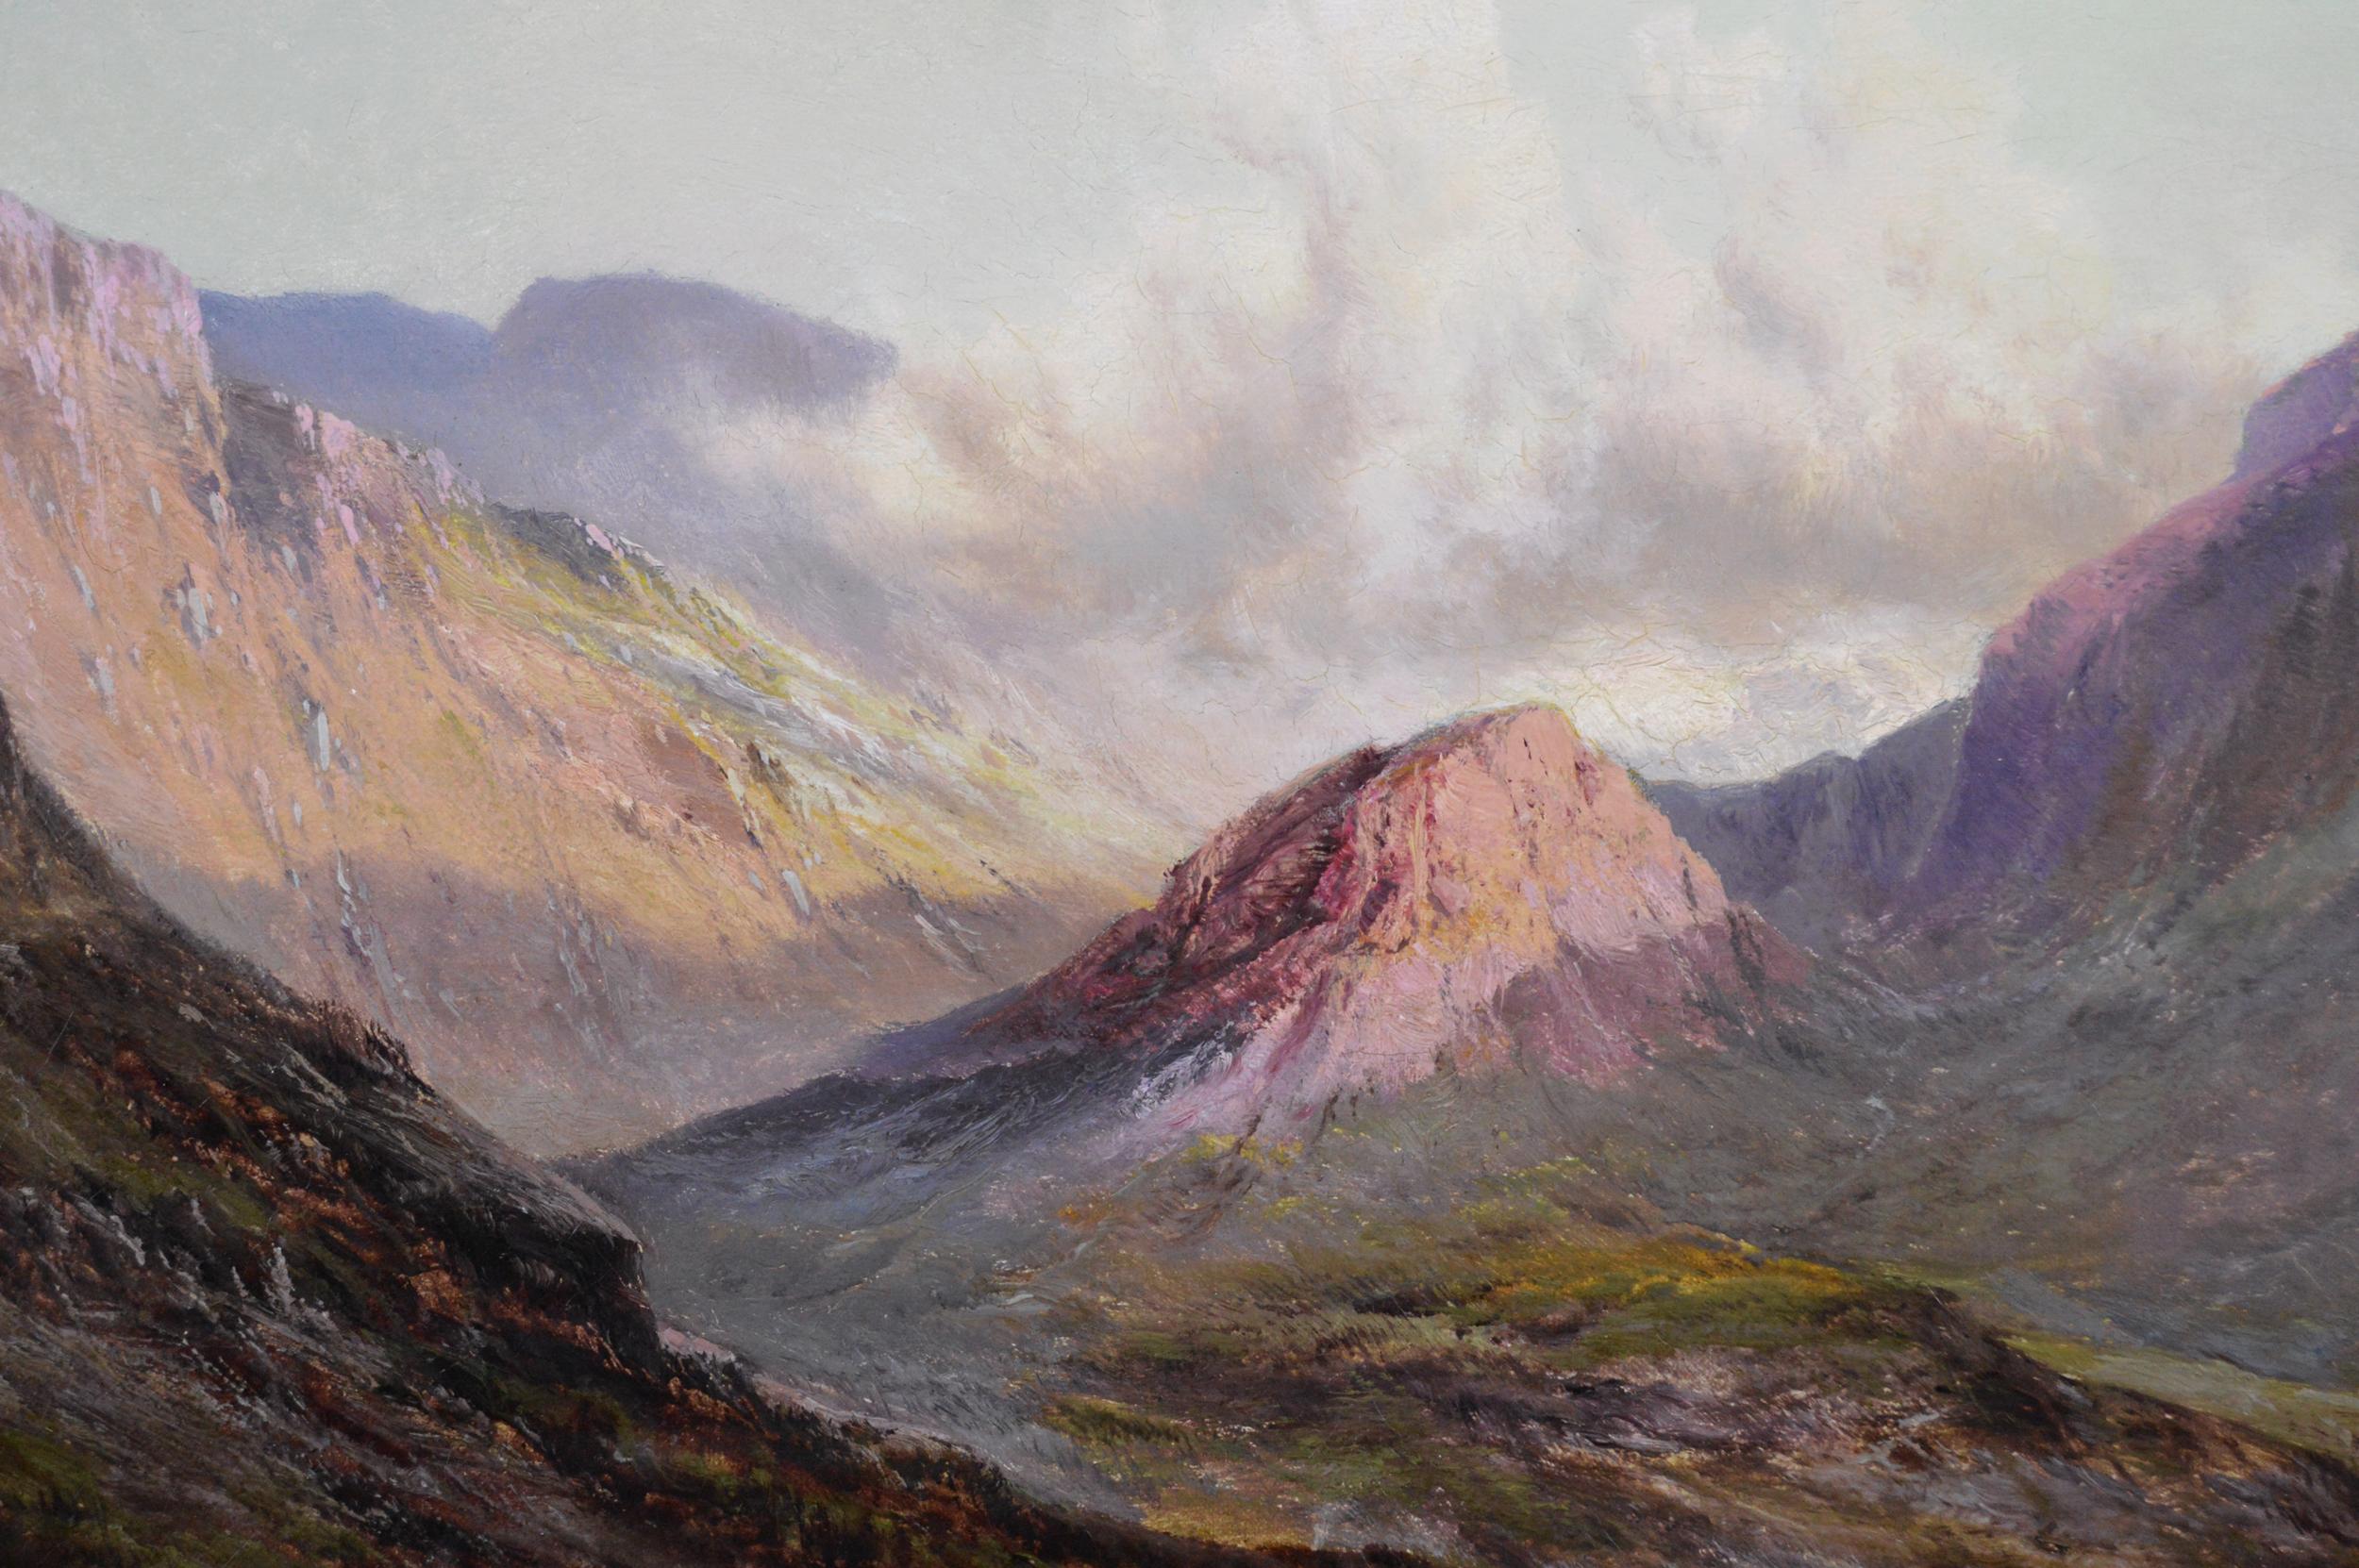 Alfred de Breanski Snr
British, (1852-1928)
At Sunset Buttermere
Oil on canvas, signed
Transcribed verso ‘at Sunset Buttermere, Alfred de Breanski RBA’
Image size: 23.5 inches x 35.5 inches 
Size including frame: 37.25 inches x 49.25 inches

Alfred